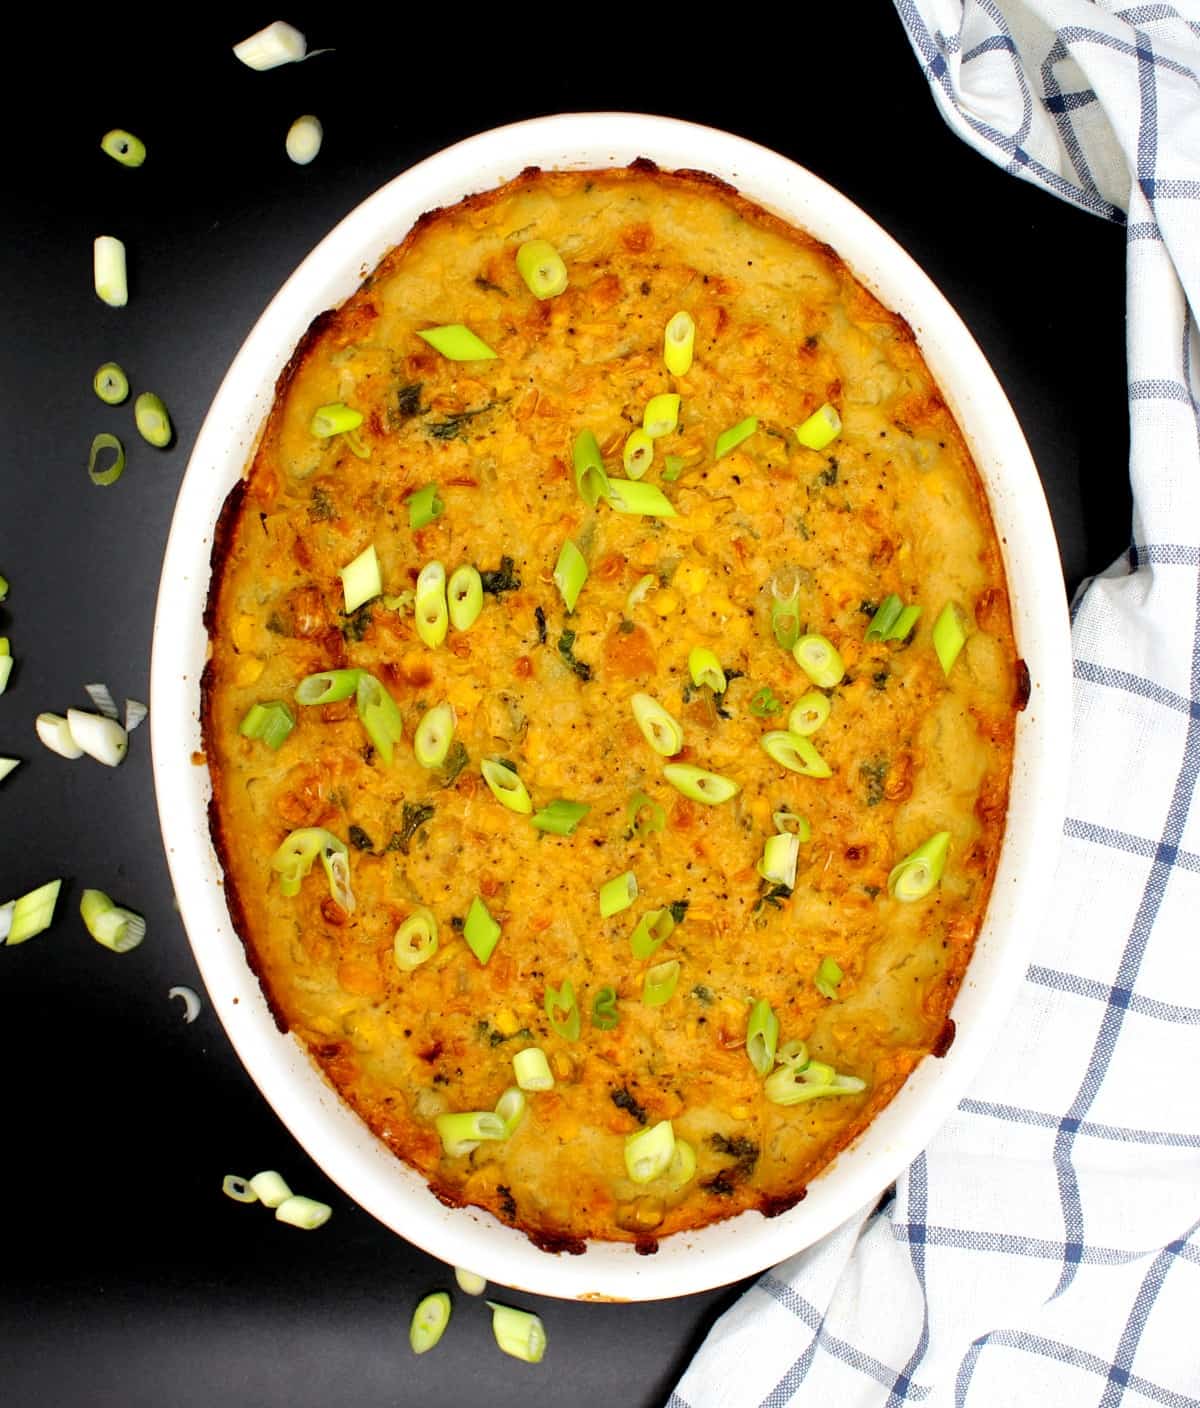 White oval casserole stoneware baking dish with savory vegan corn pudding strewn with scallions. Next to the dish is a blue and white napkin on a black background.